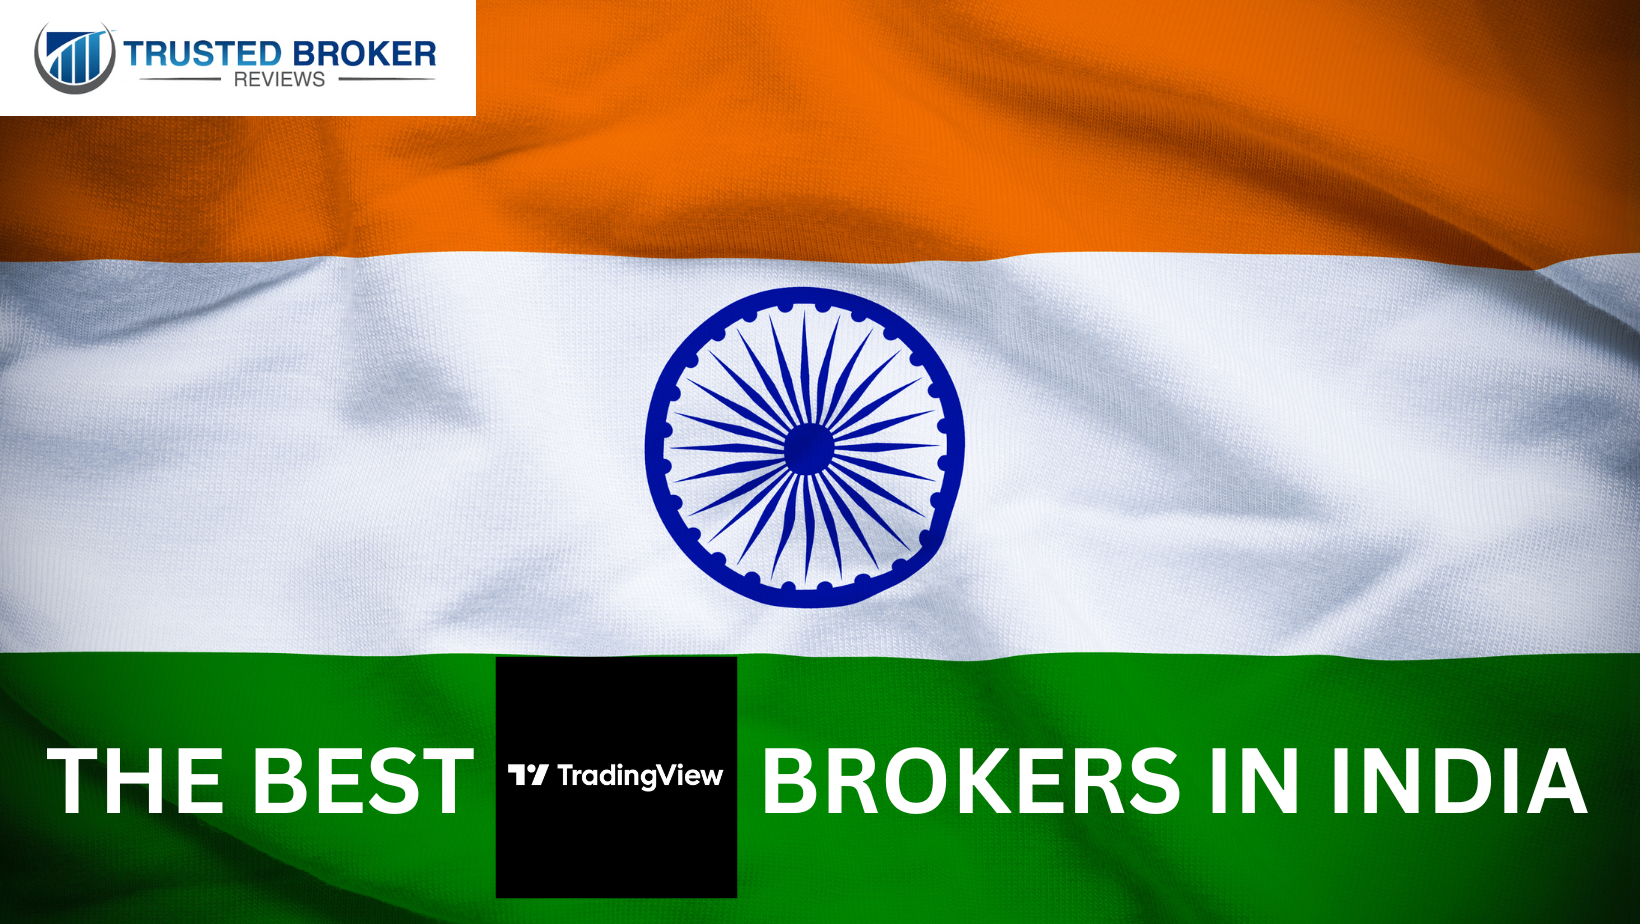 The best tradingview brokers in India